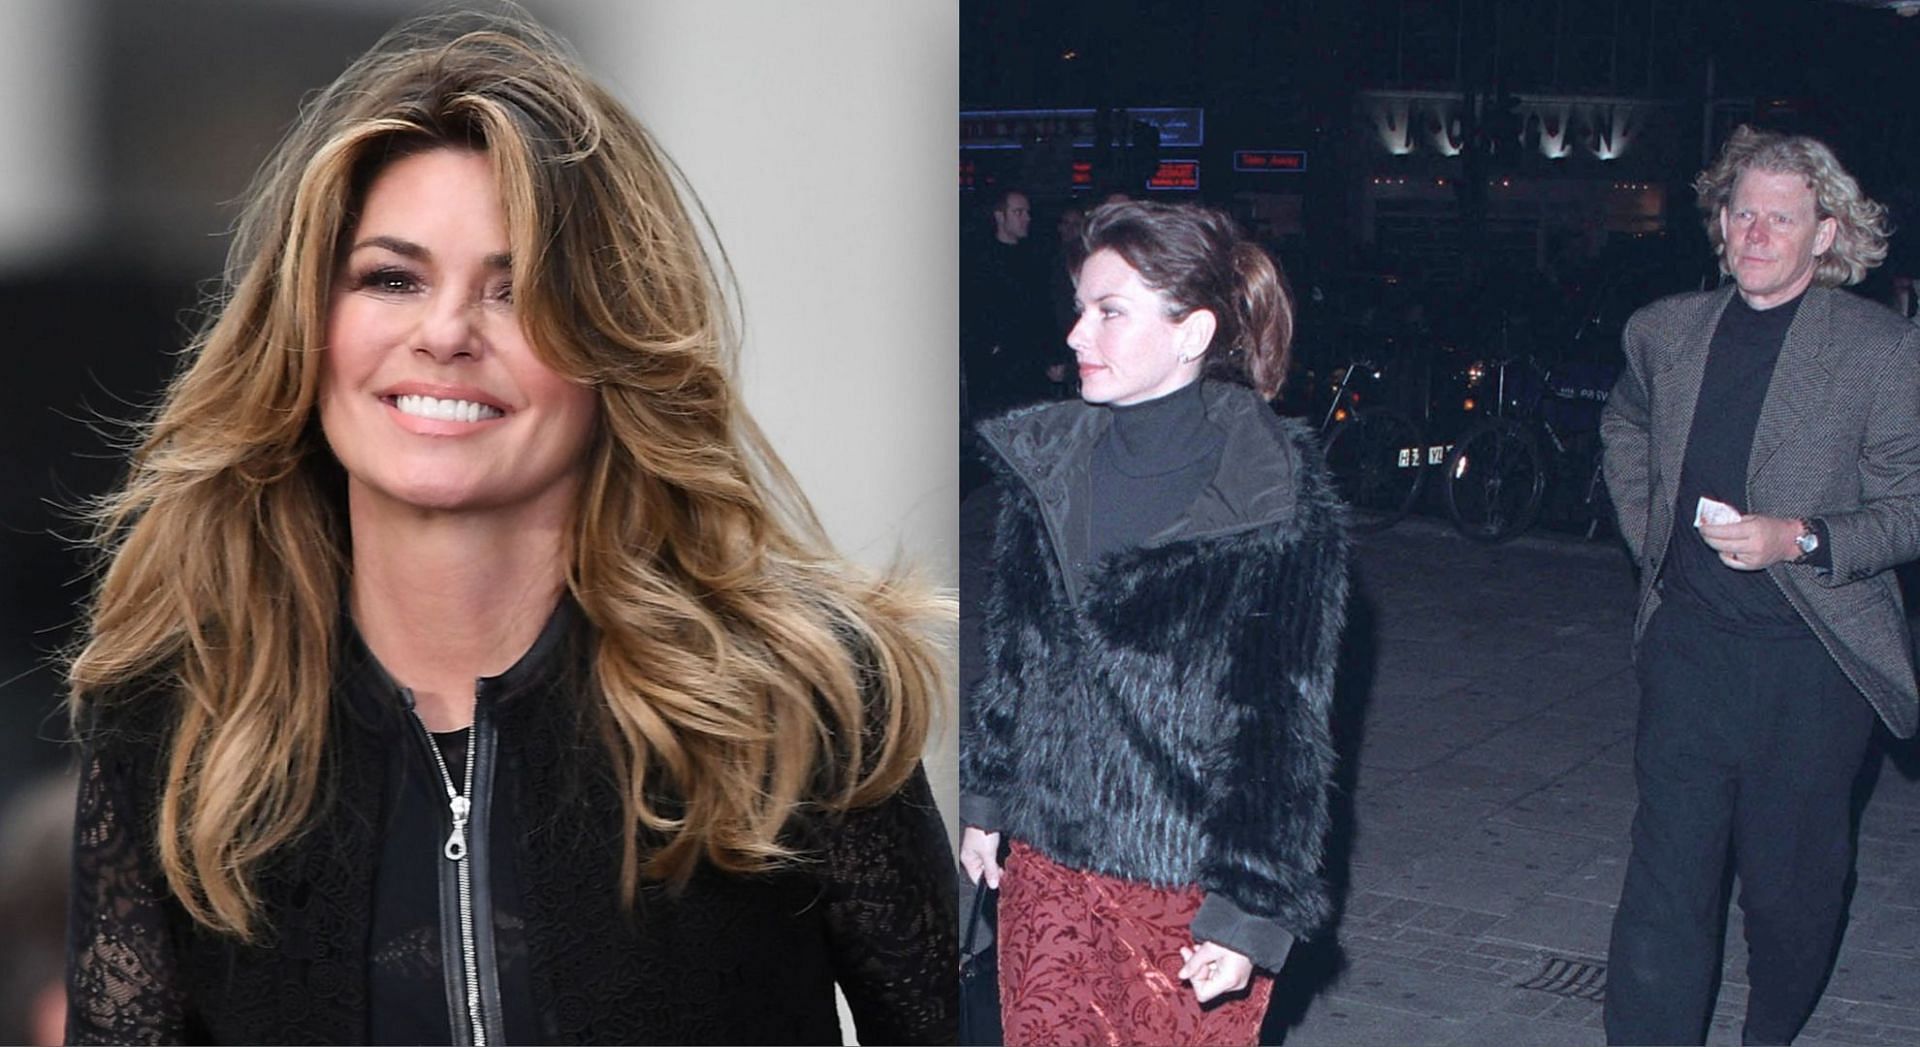 Shania Twain recently reflected on her divorce and her former husband